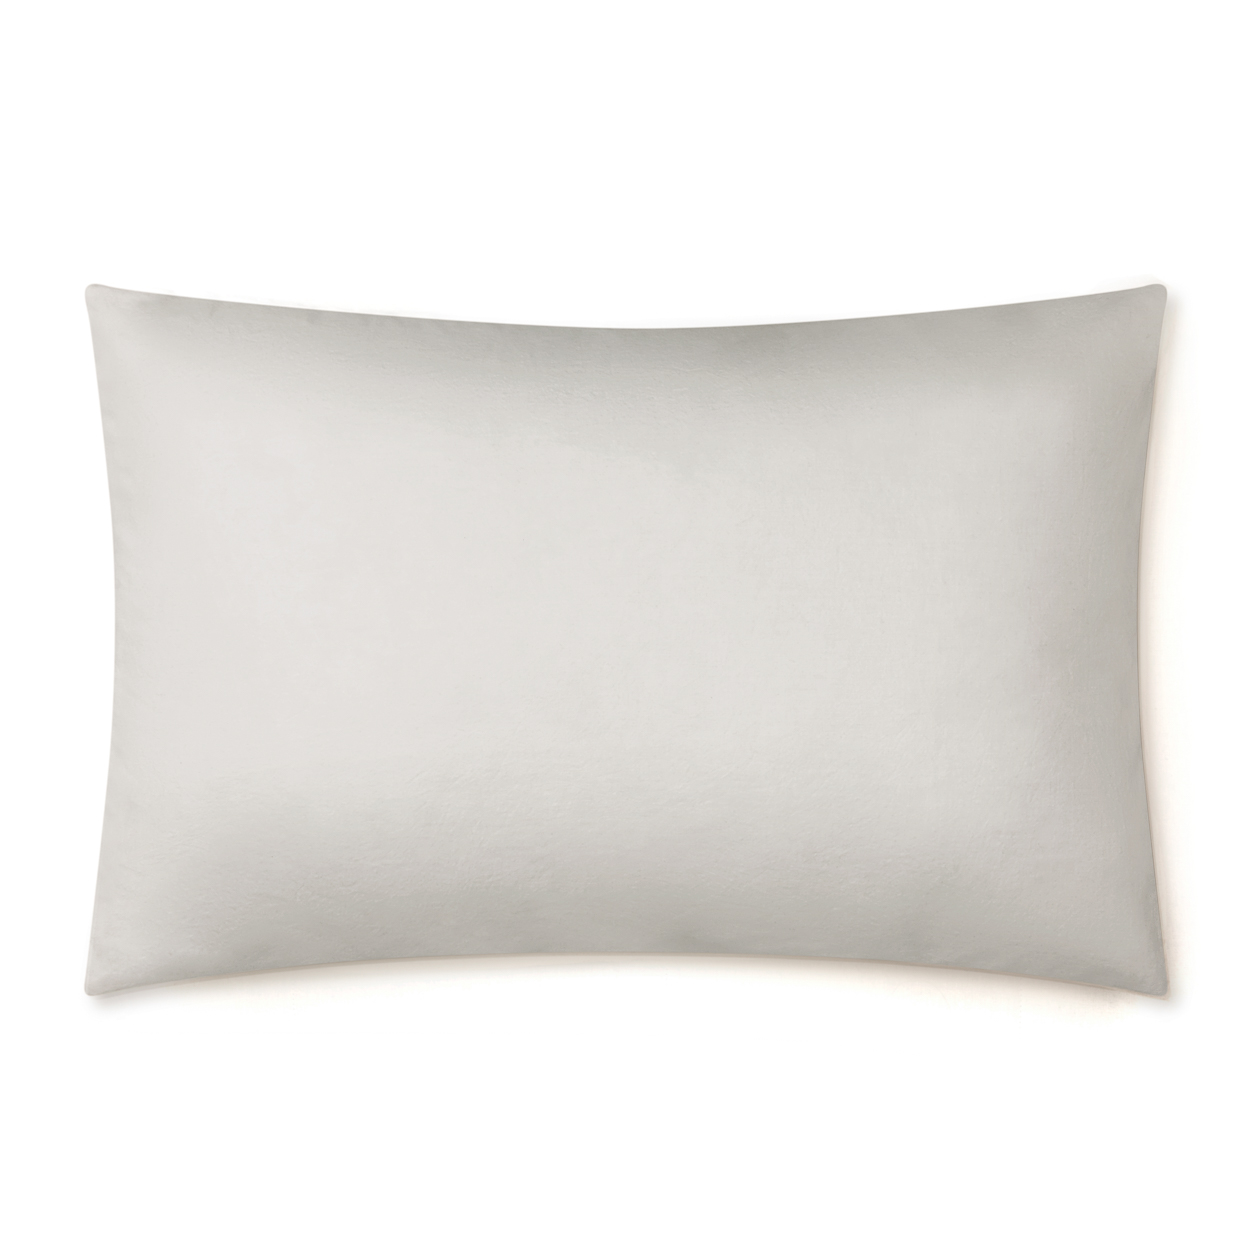 Flannel Cotton Pillowcases - Set of 2